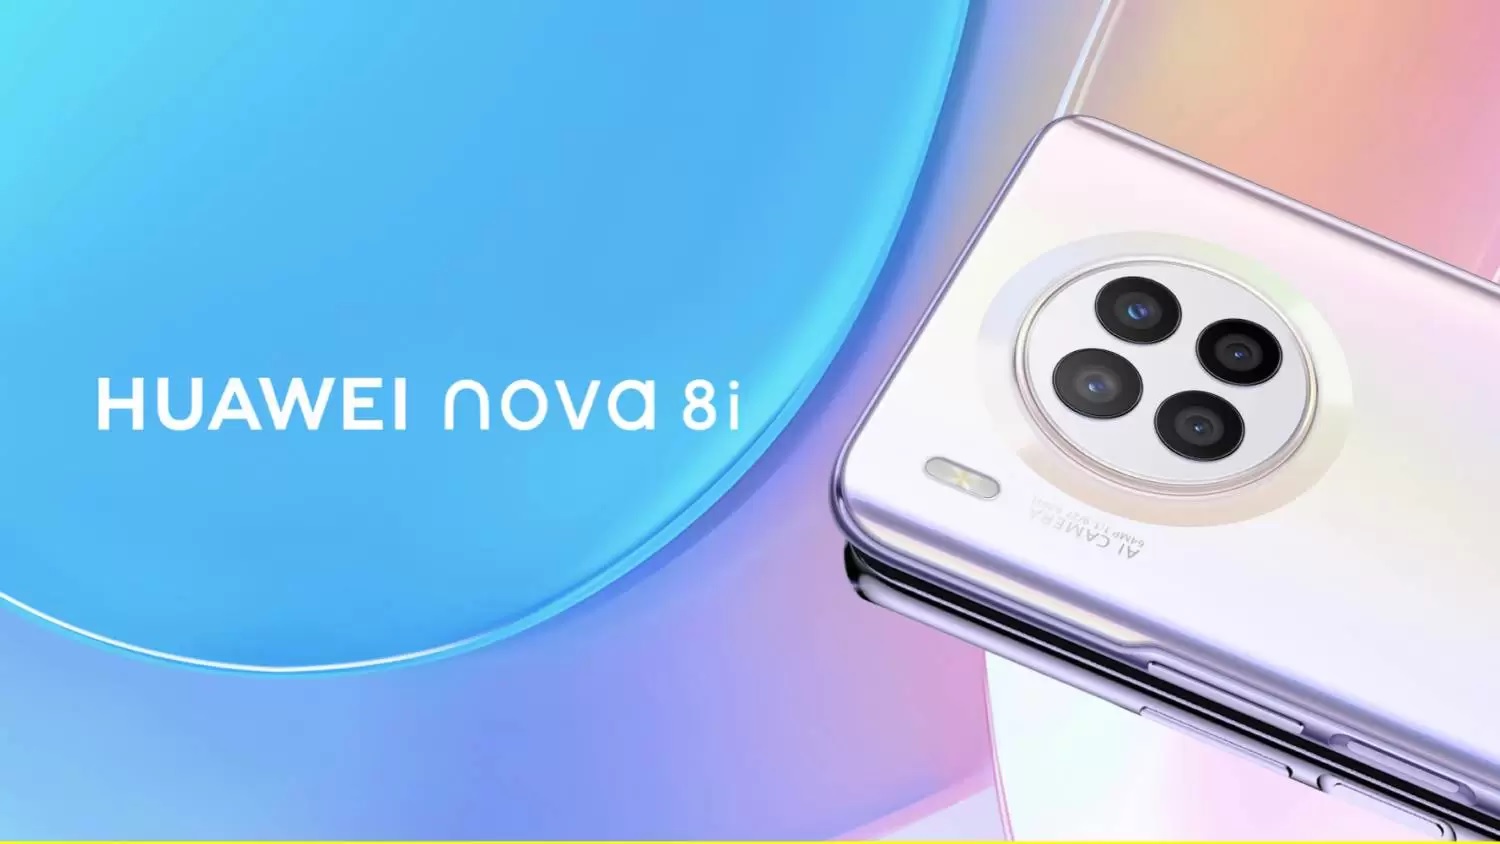 Huawei Nova 8i launches with Snapdragon 662 SoC, 66W charging, and 64MP quad-camera